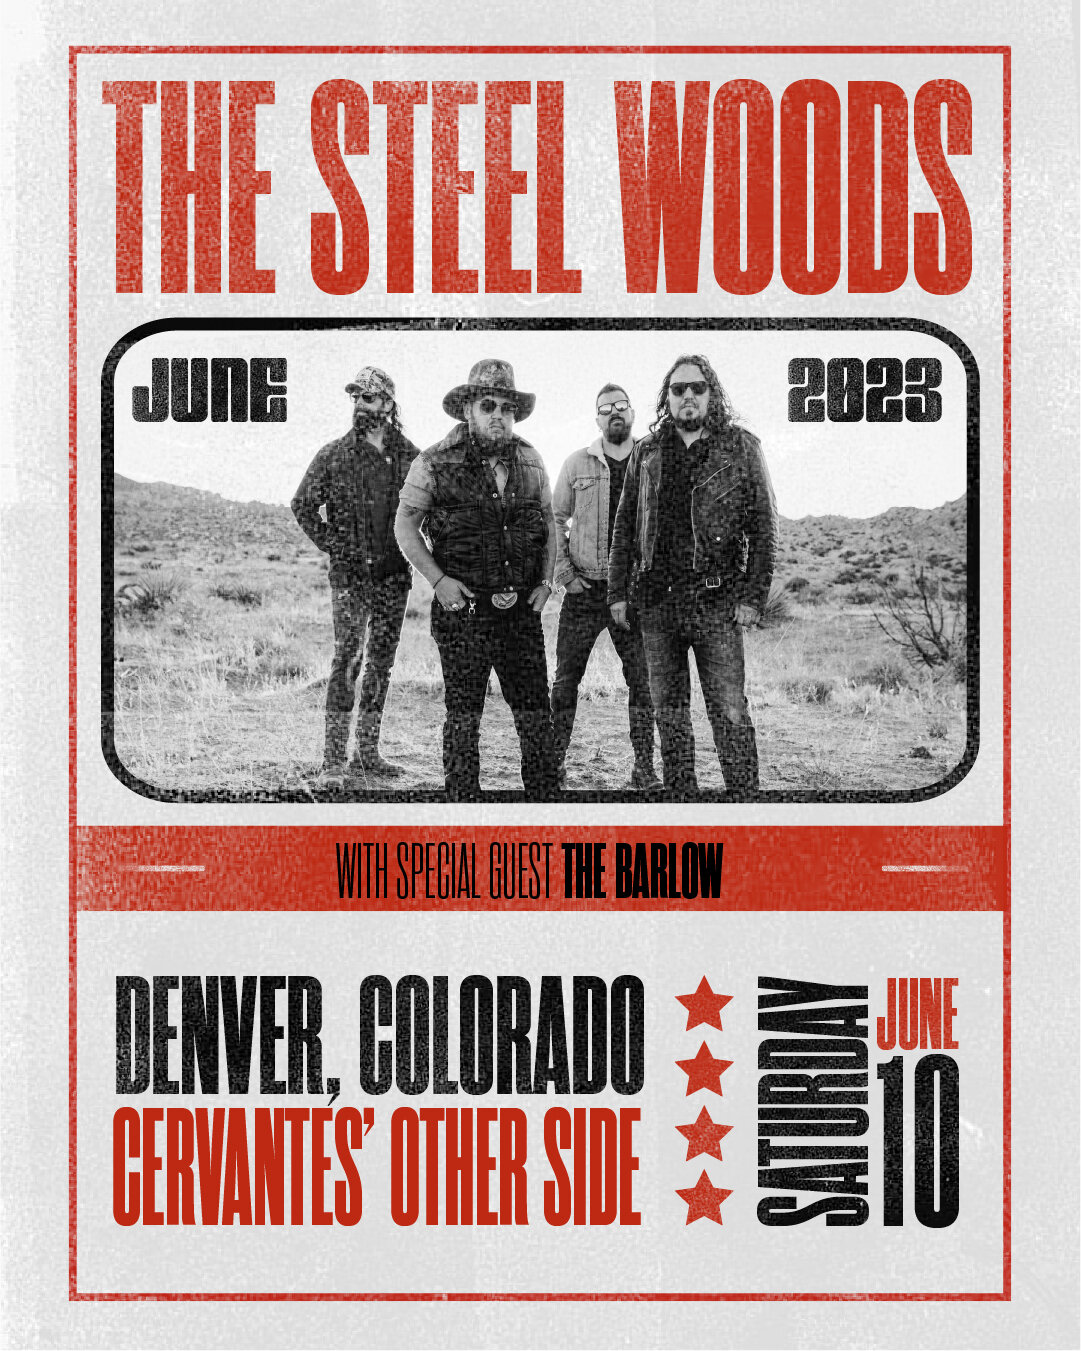 TICKET GIVEAWAY! Comment AND share this post on IG stories and we'll pick a winner on Friday for TWO tickets. Make sure your post is public so we can see it! Do the same on our Facebook for higher odds. 

 @thesteelwoods  @cervantesmasterpiece @trueg